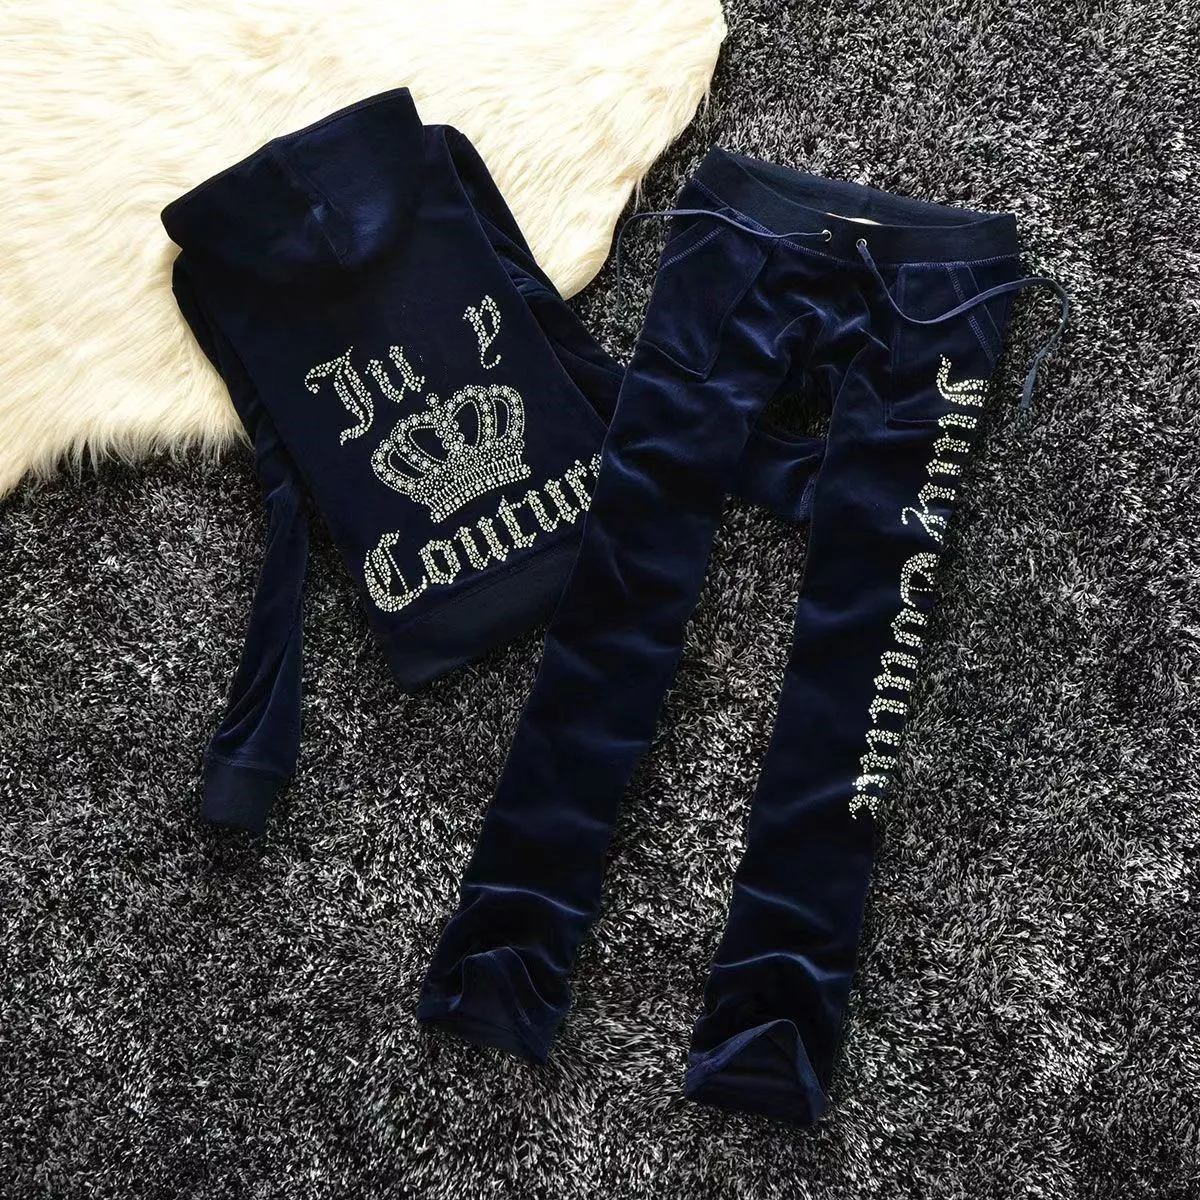 Women's Two Piece Pants Velvet Juicy Tracksuit Women Coutoure Set Track Suit Couture Juciy Coture Sweatsuits letters hooded hoodie loose fitting designer outfit c19